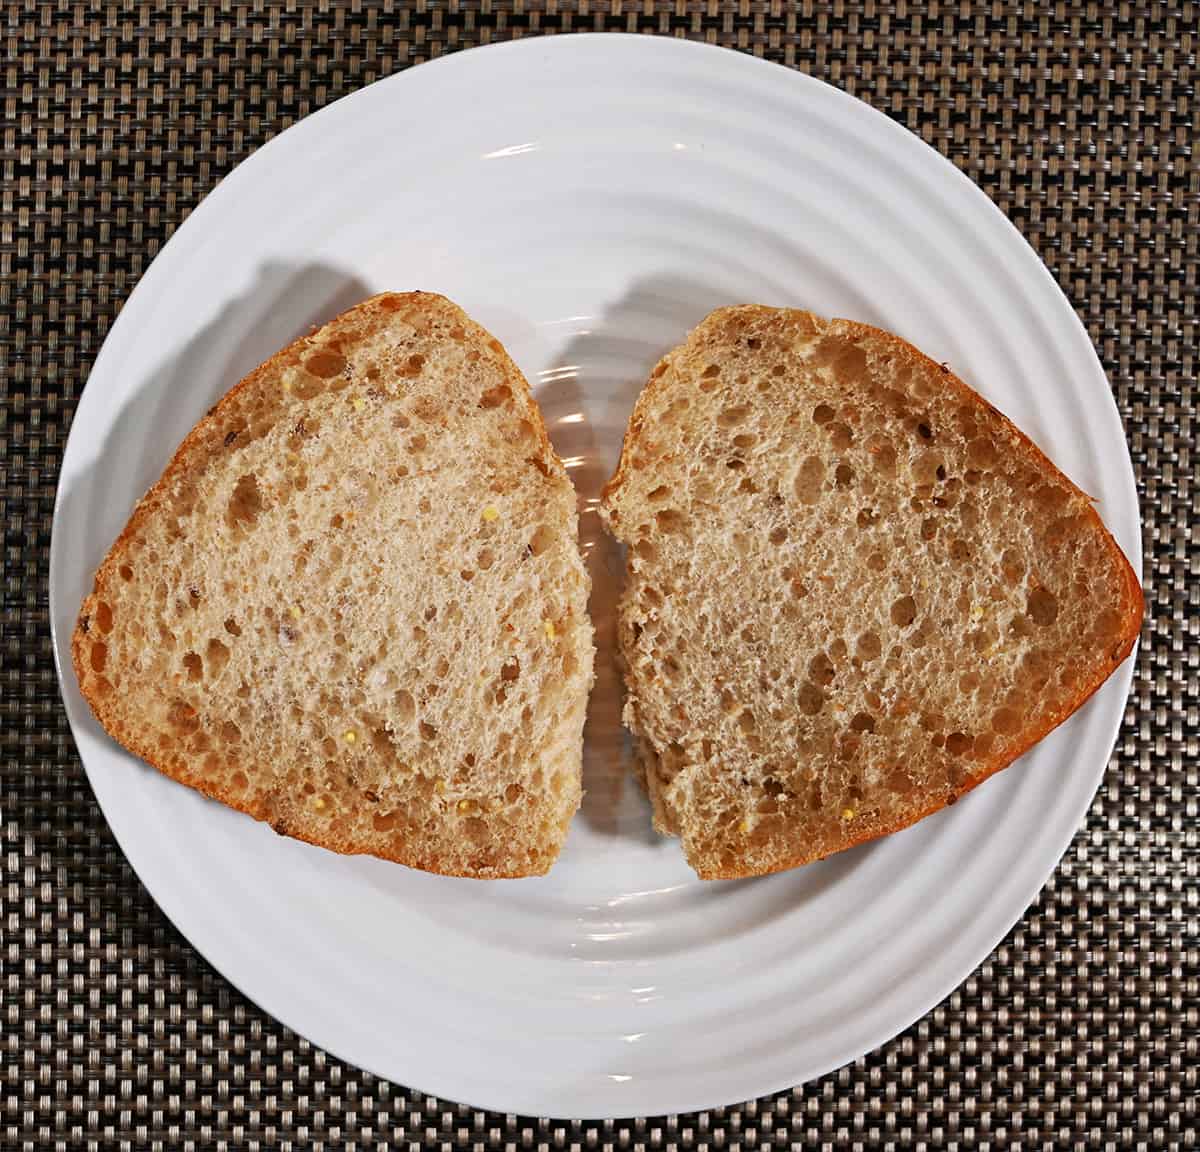 Top down image of a 9 grain ciabatta bun cut in half and served open on a plate so you can see the center.